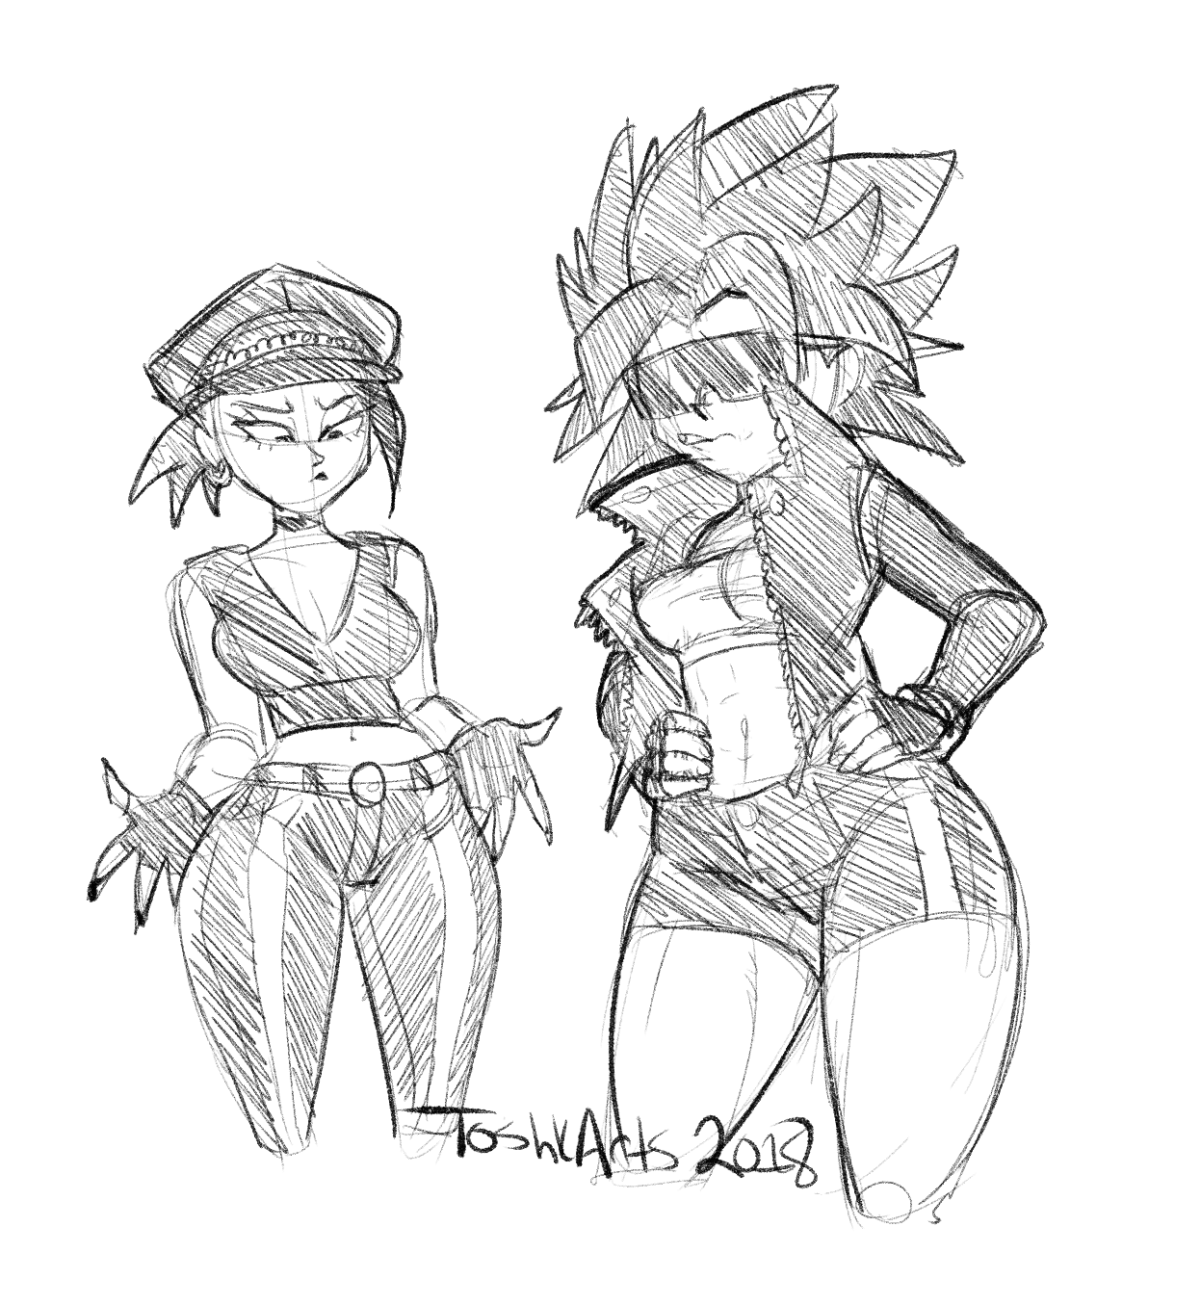 toshkarts: Y’all been waiting a long time for this but here they are:Biker Caulifla